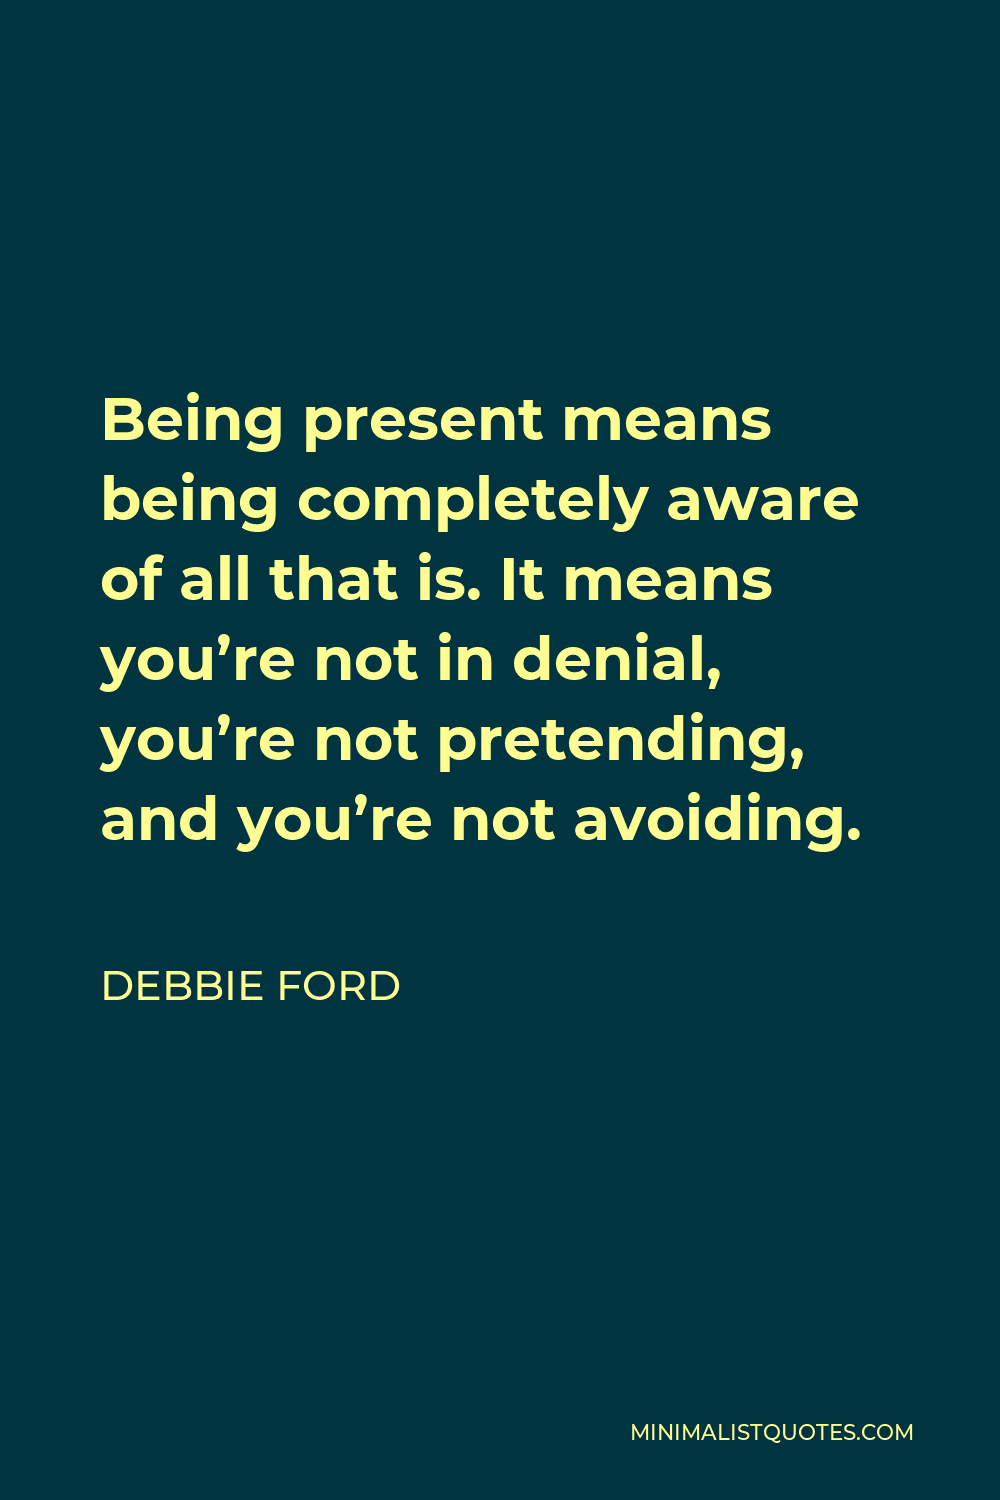 Debbie Ford Quote - Being present means being completely aware of all that is. It means you’re not in denial, you’re not pretending, and you’re not avoiding.